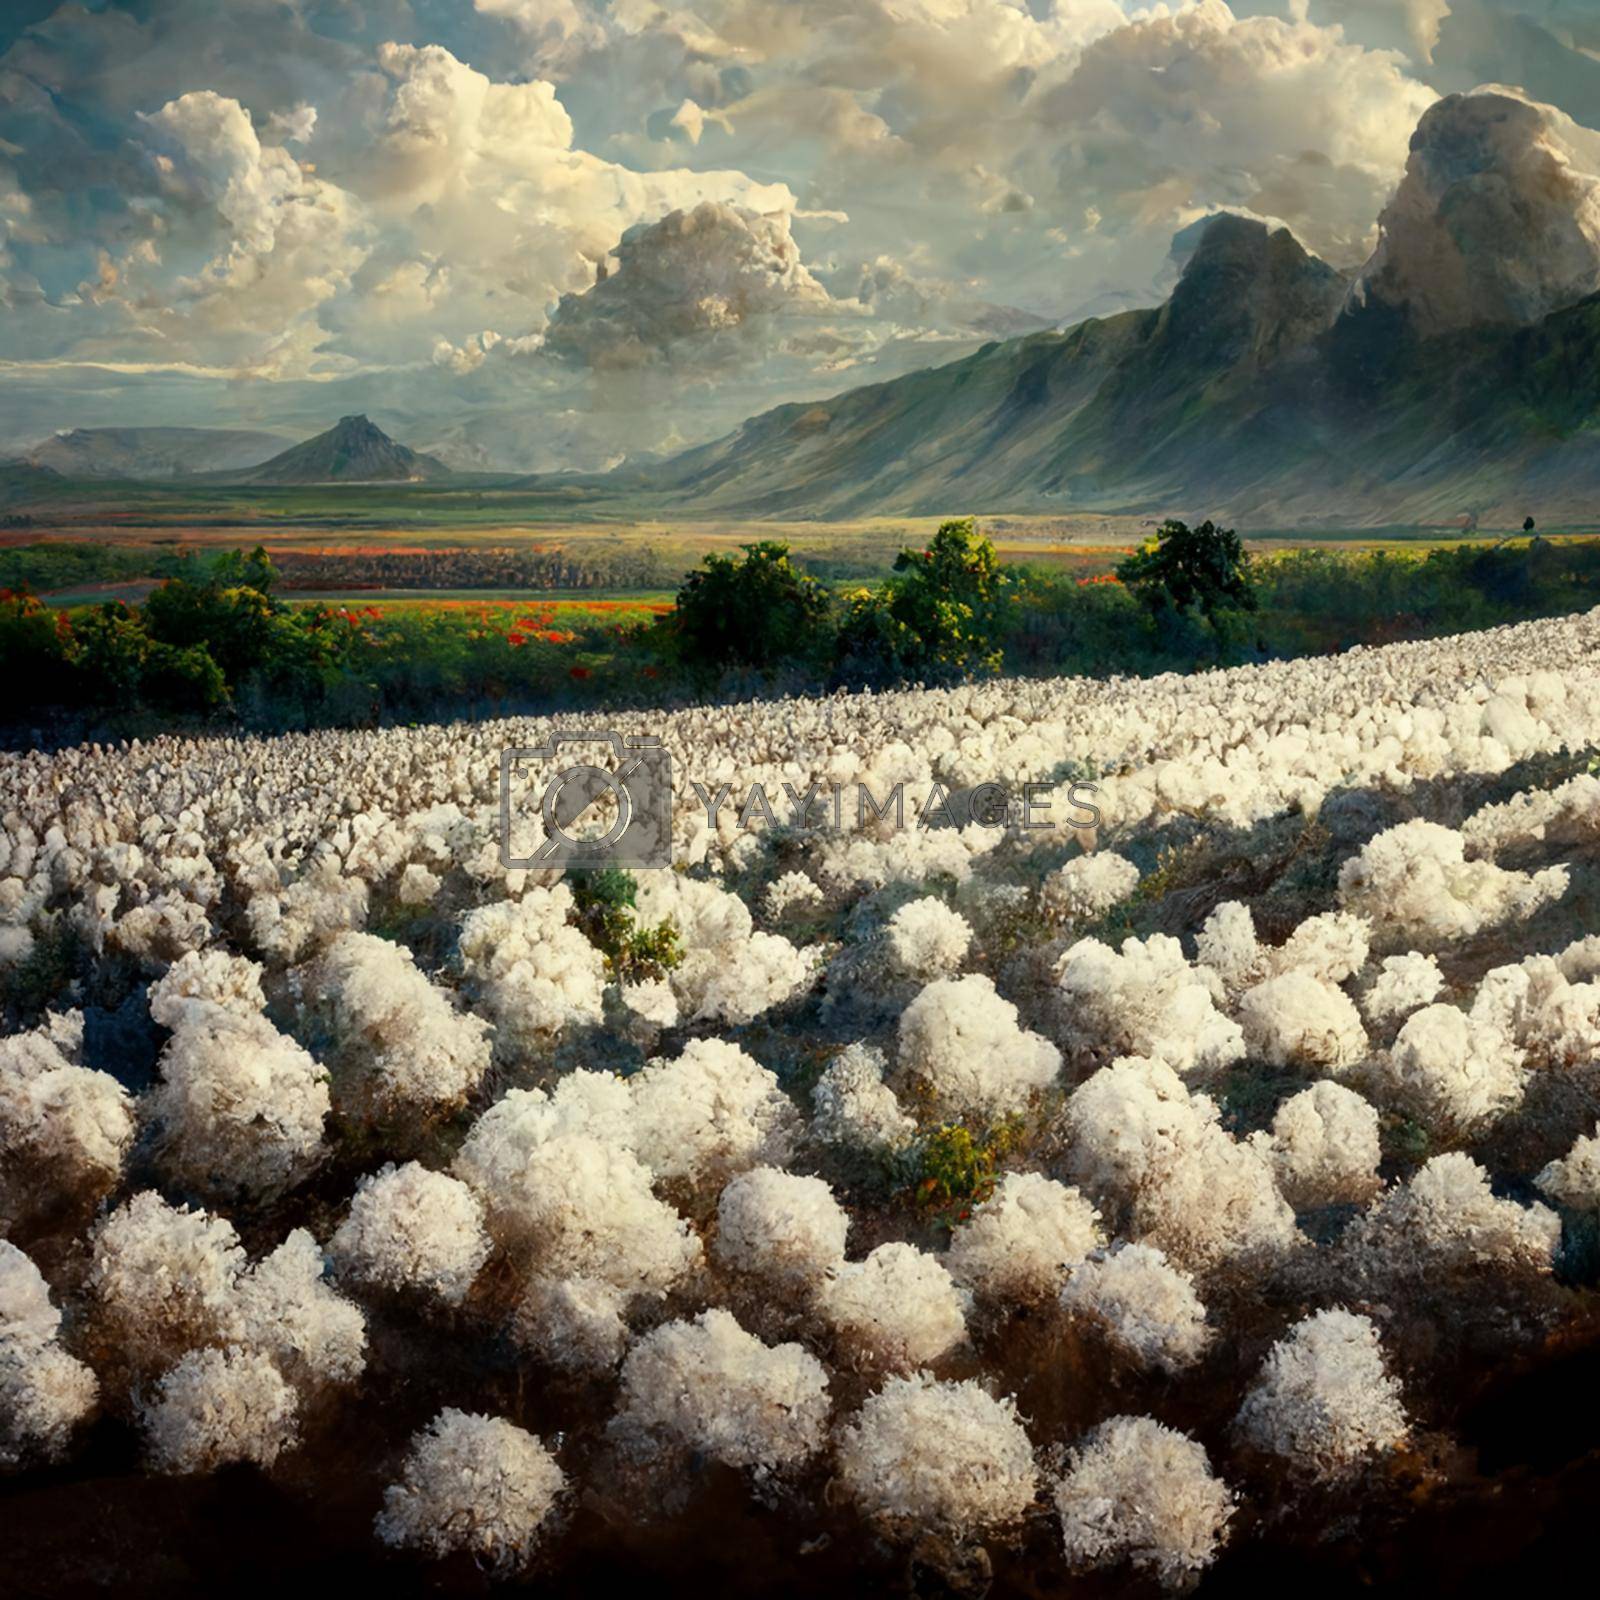 Royalty free image of Cotton fields ready for harvesting, snow mountains and clouds. by marylooo